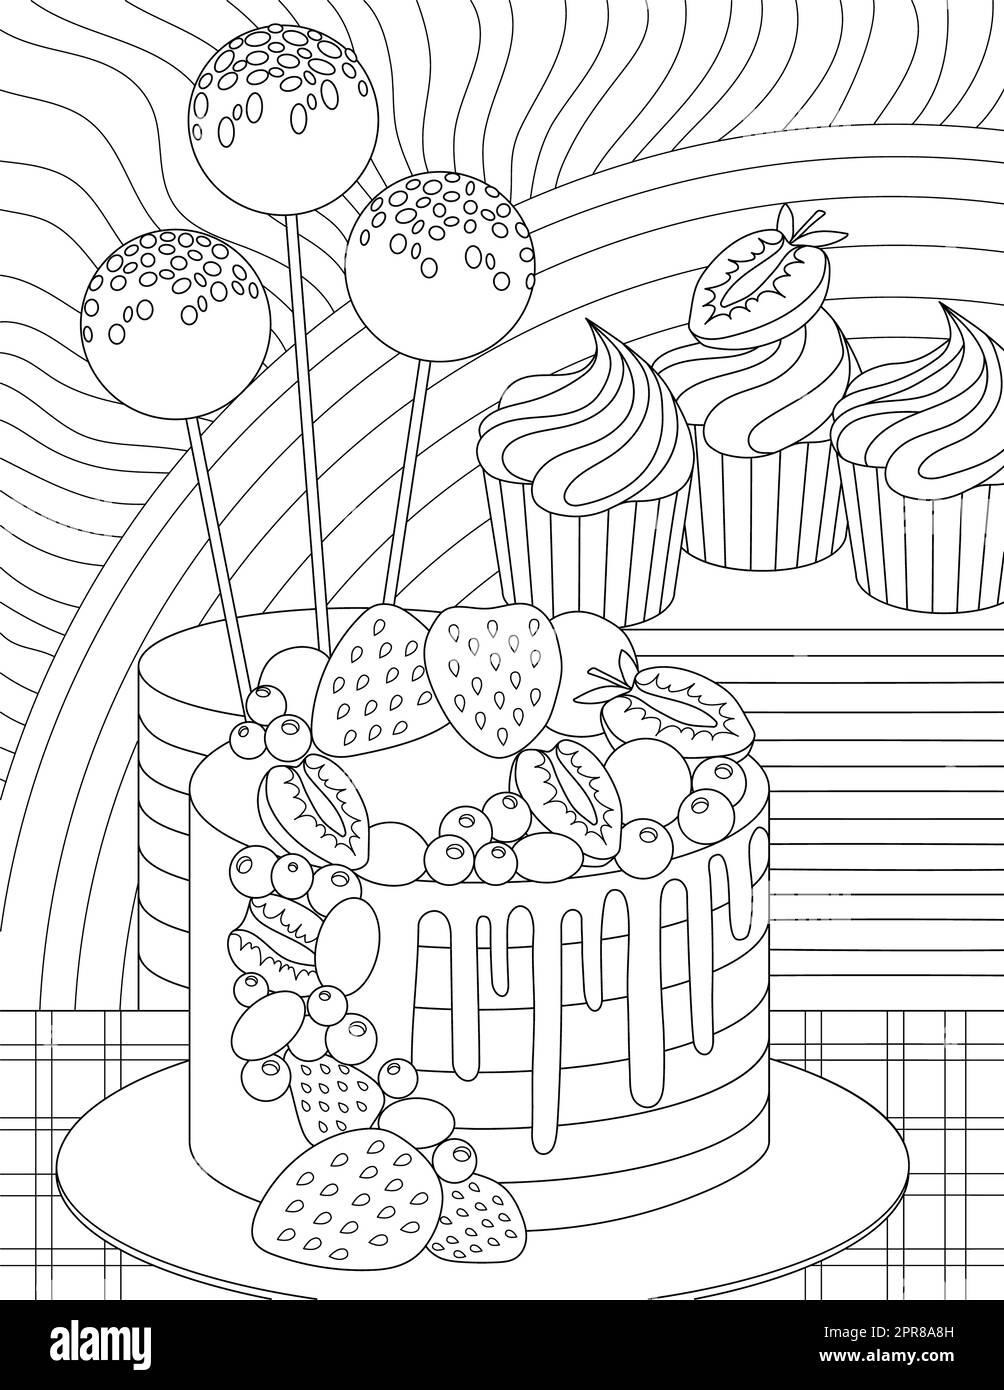 Coloring Book Page With Birthday Cakes With Fruity Decorations And Cupcakes Stock Photo